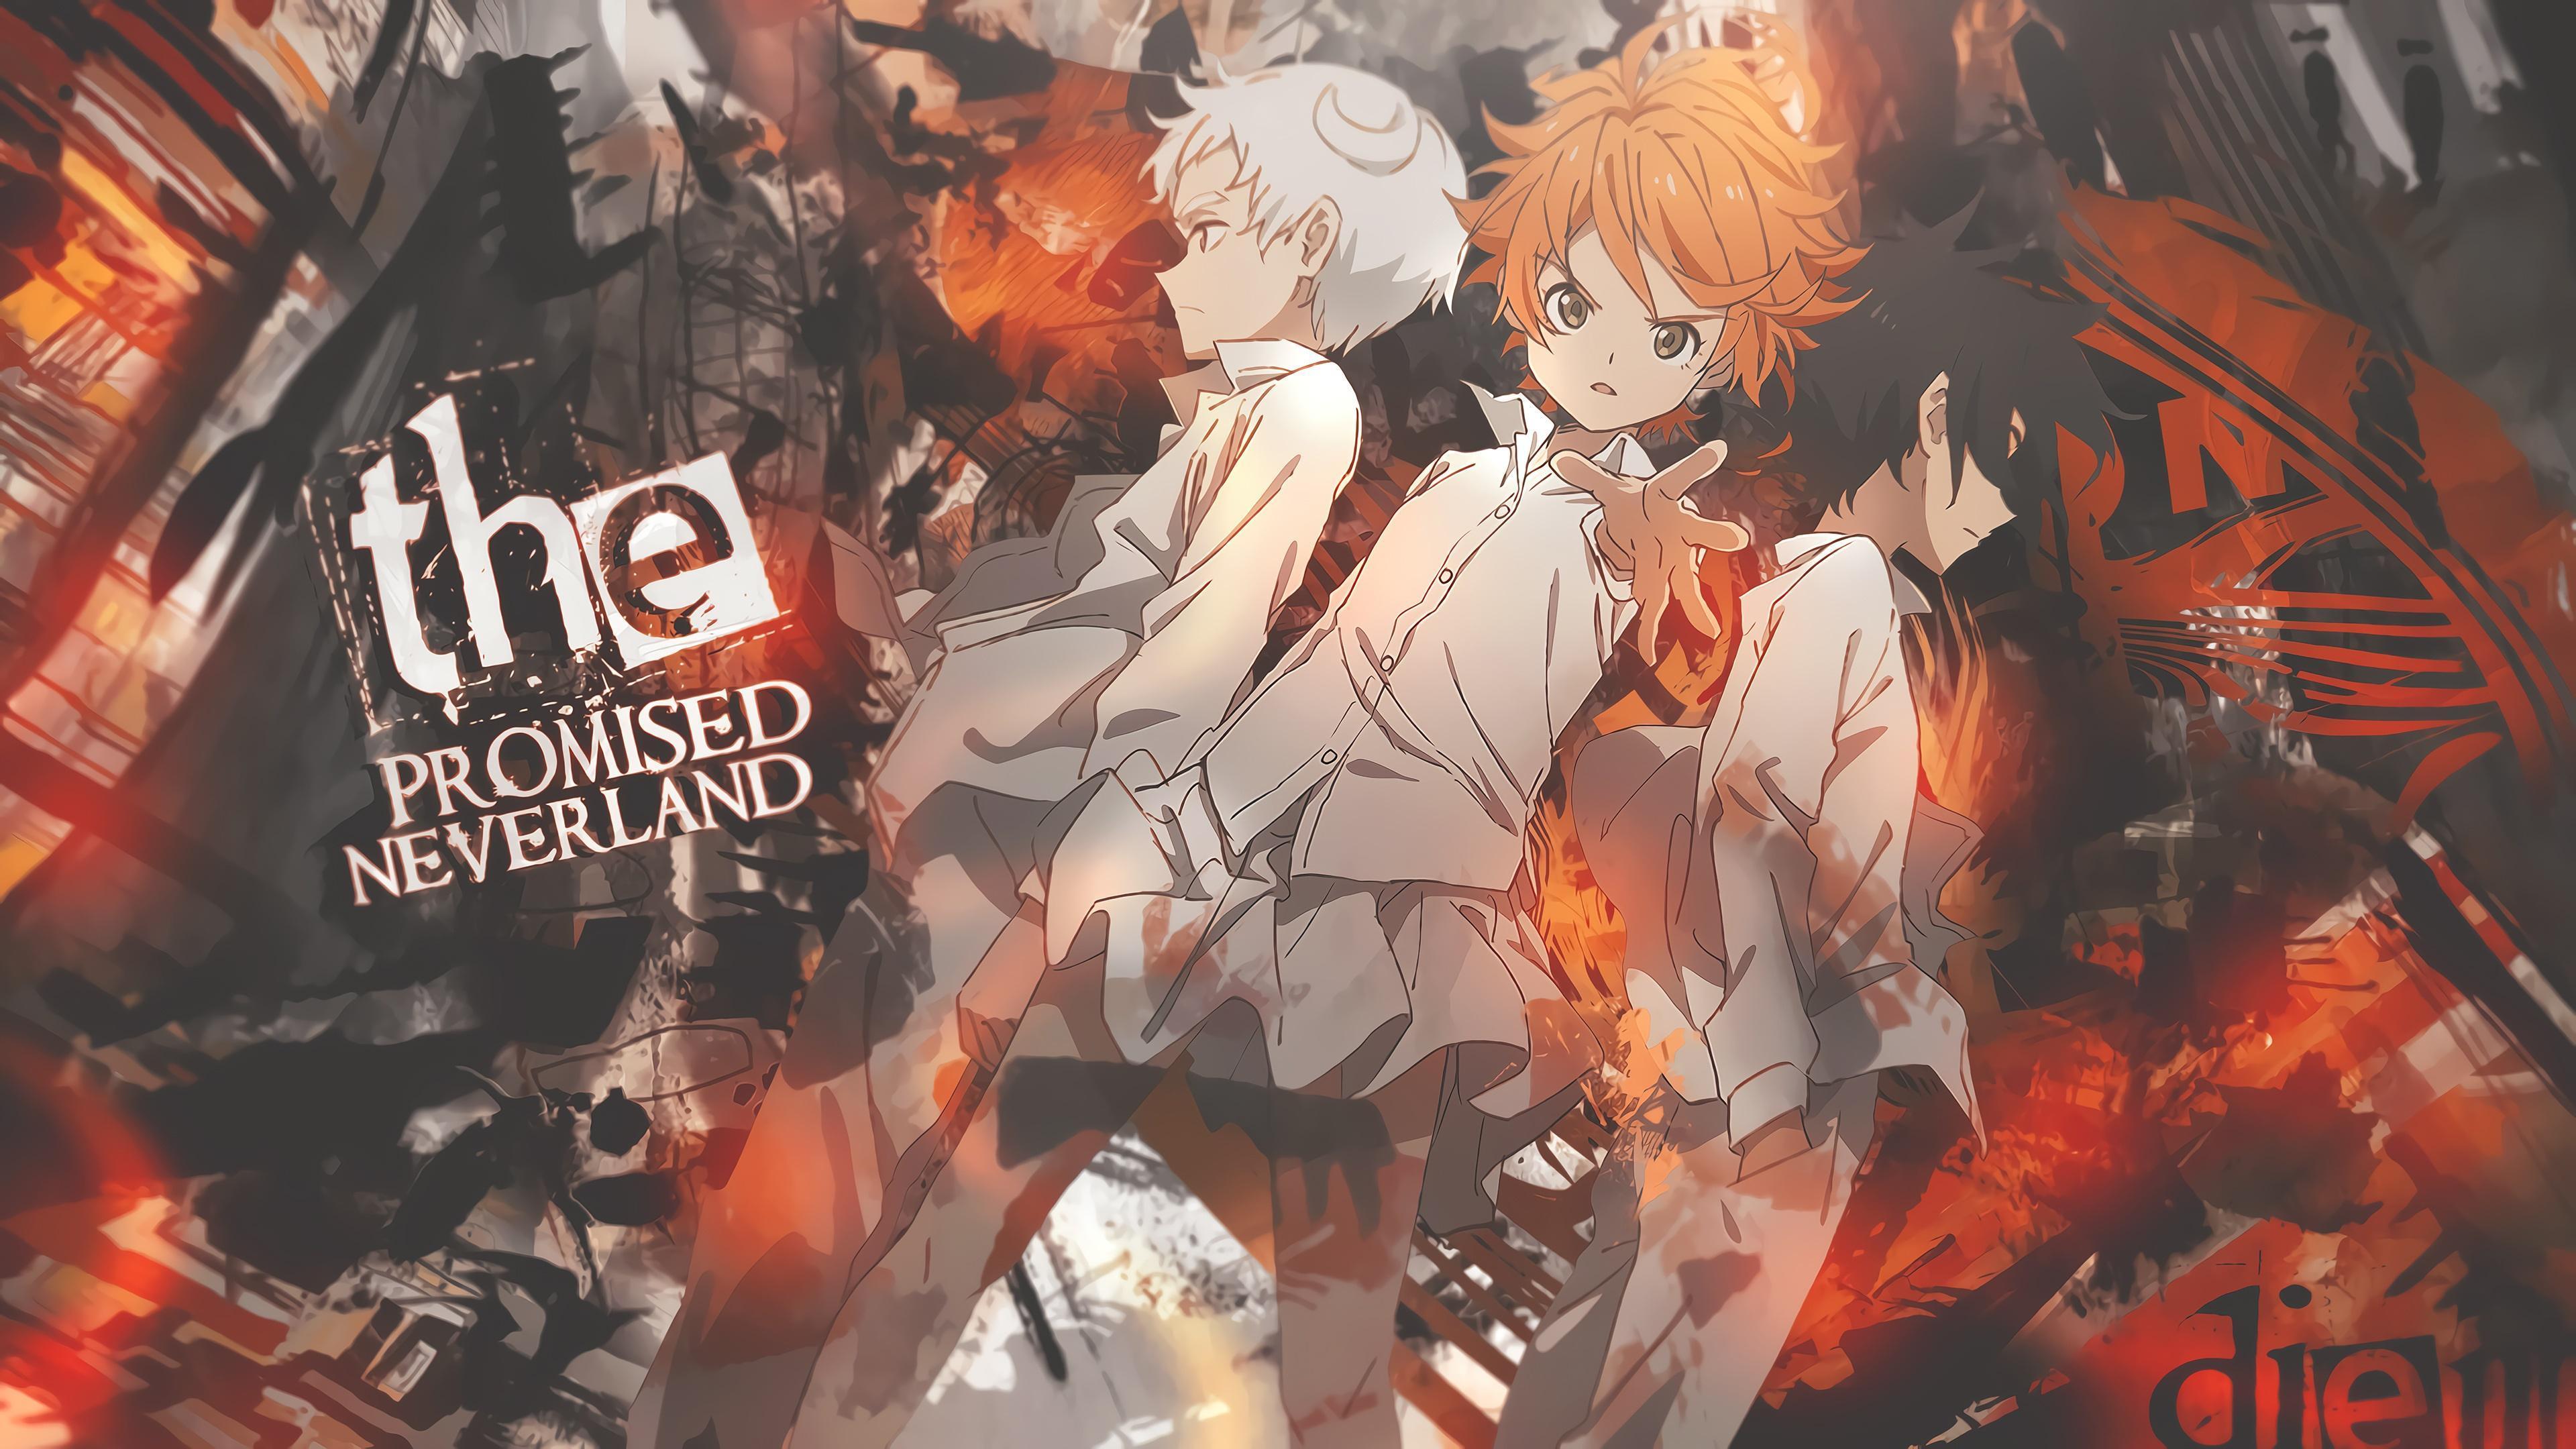 HD wallpaper, Wallpaper, Emma, Norman, 4K, Ray, Hd, The Promised Neverland